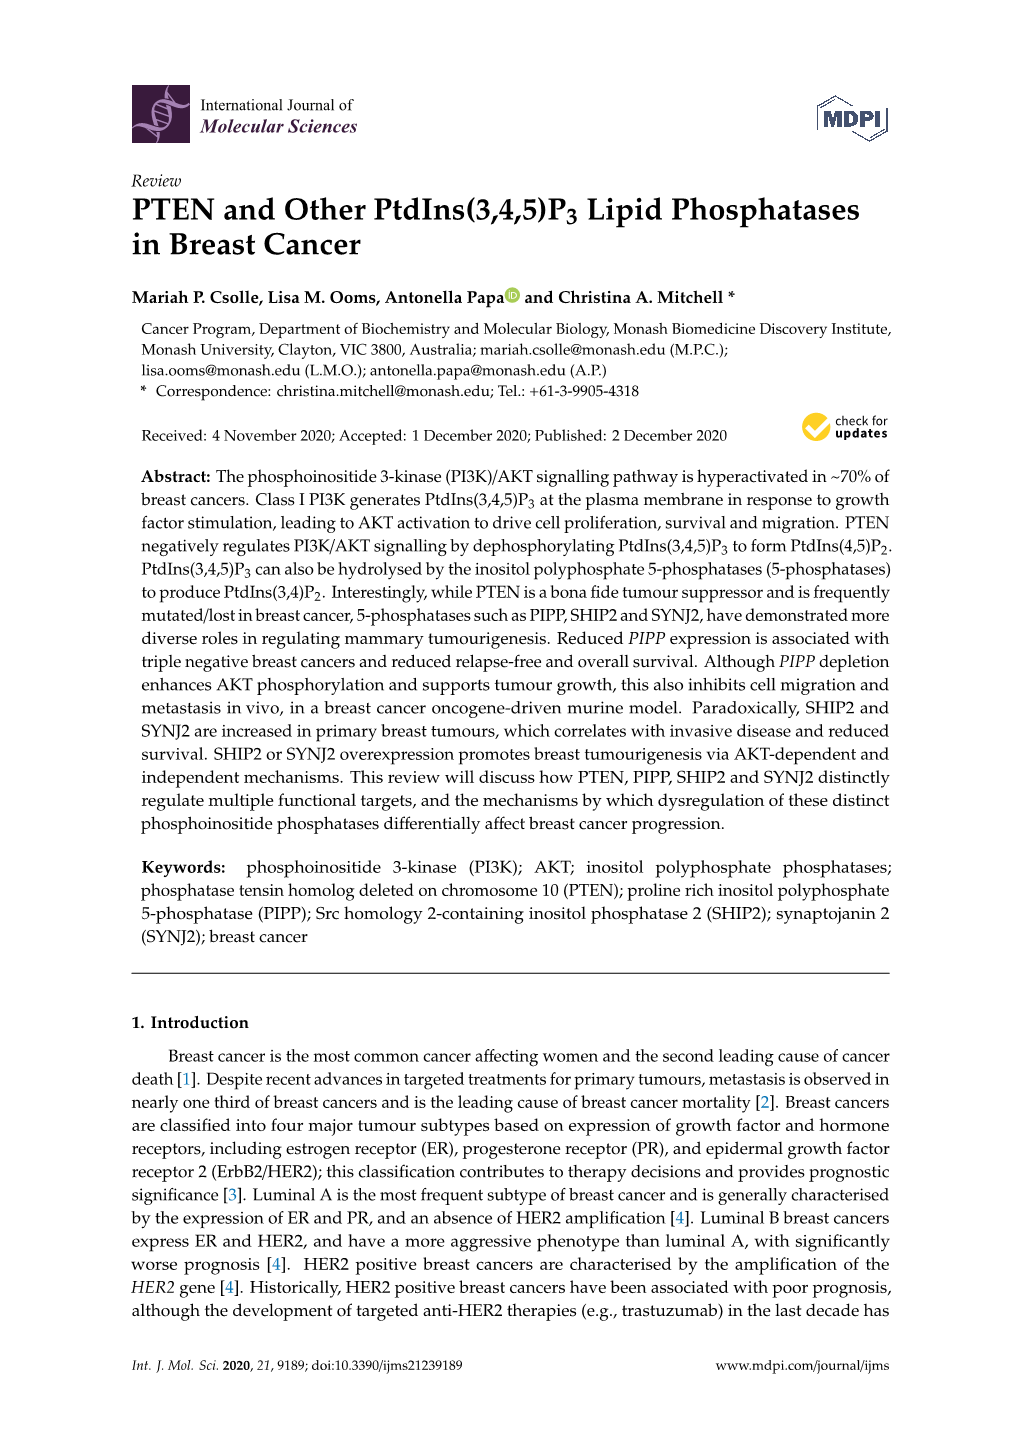 PTEN and Other Ptdins(3,4,5)P3 Lipid Phosphatases in Breast Cancer